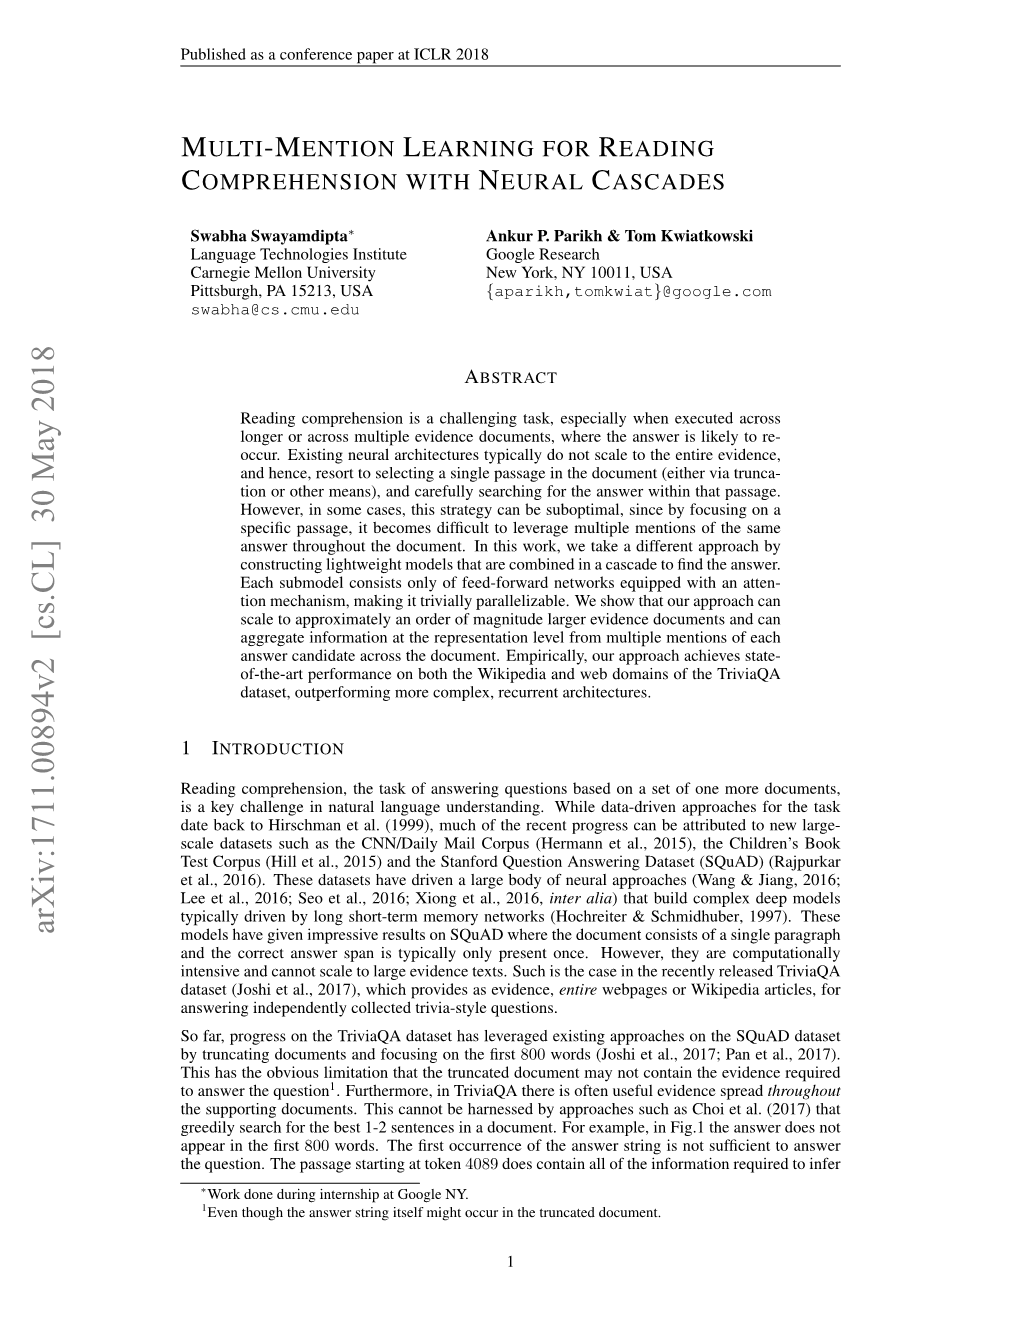 Multi-Mention Learning for Reading Comprehension with Neural Cascades